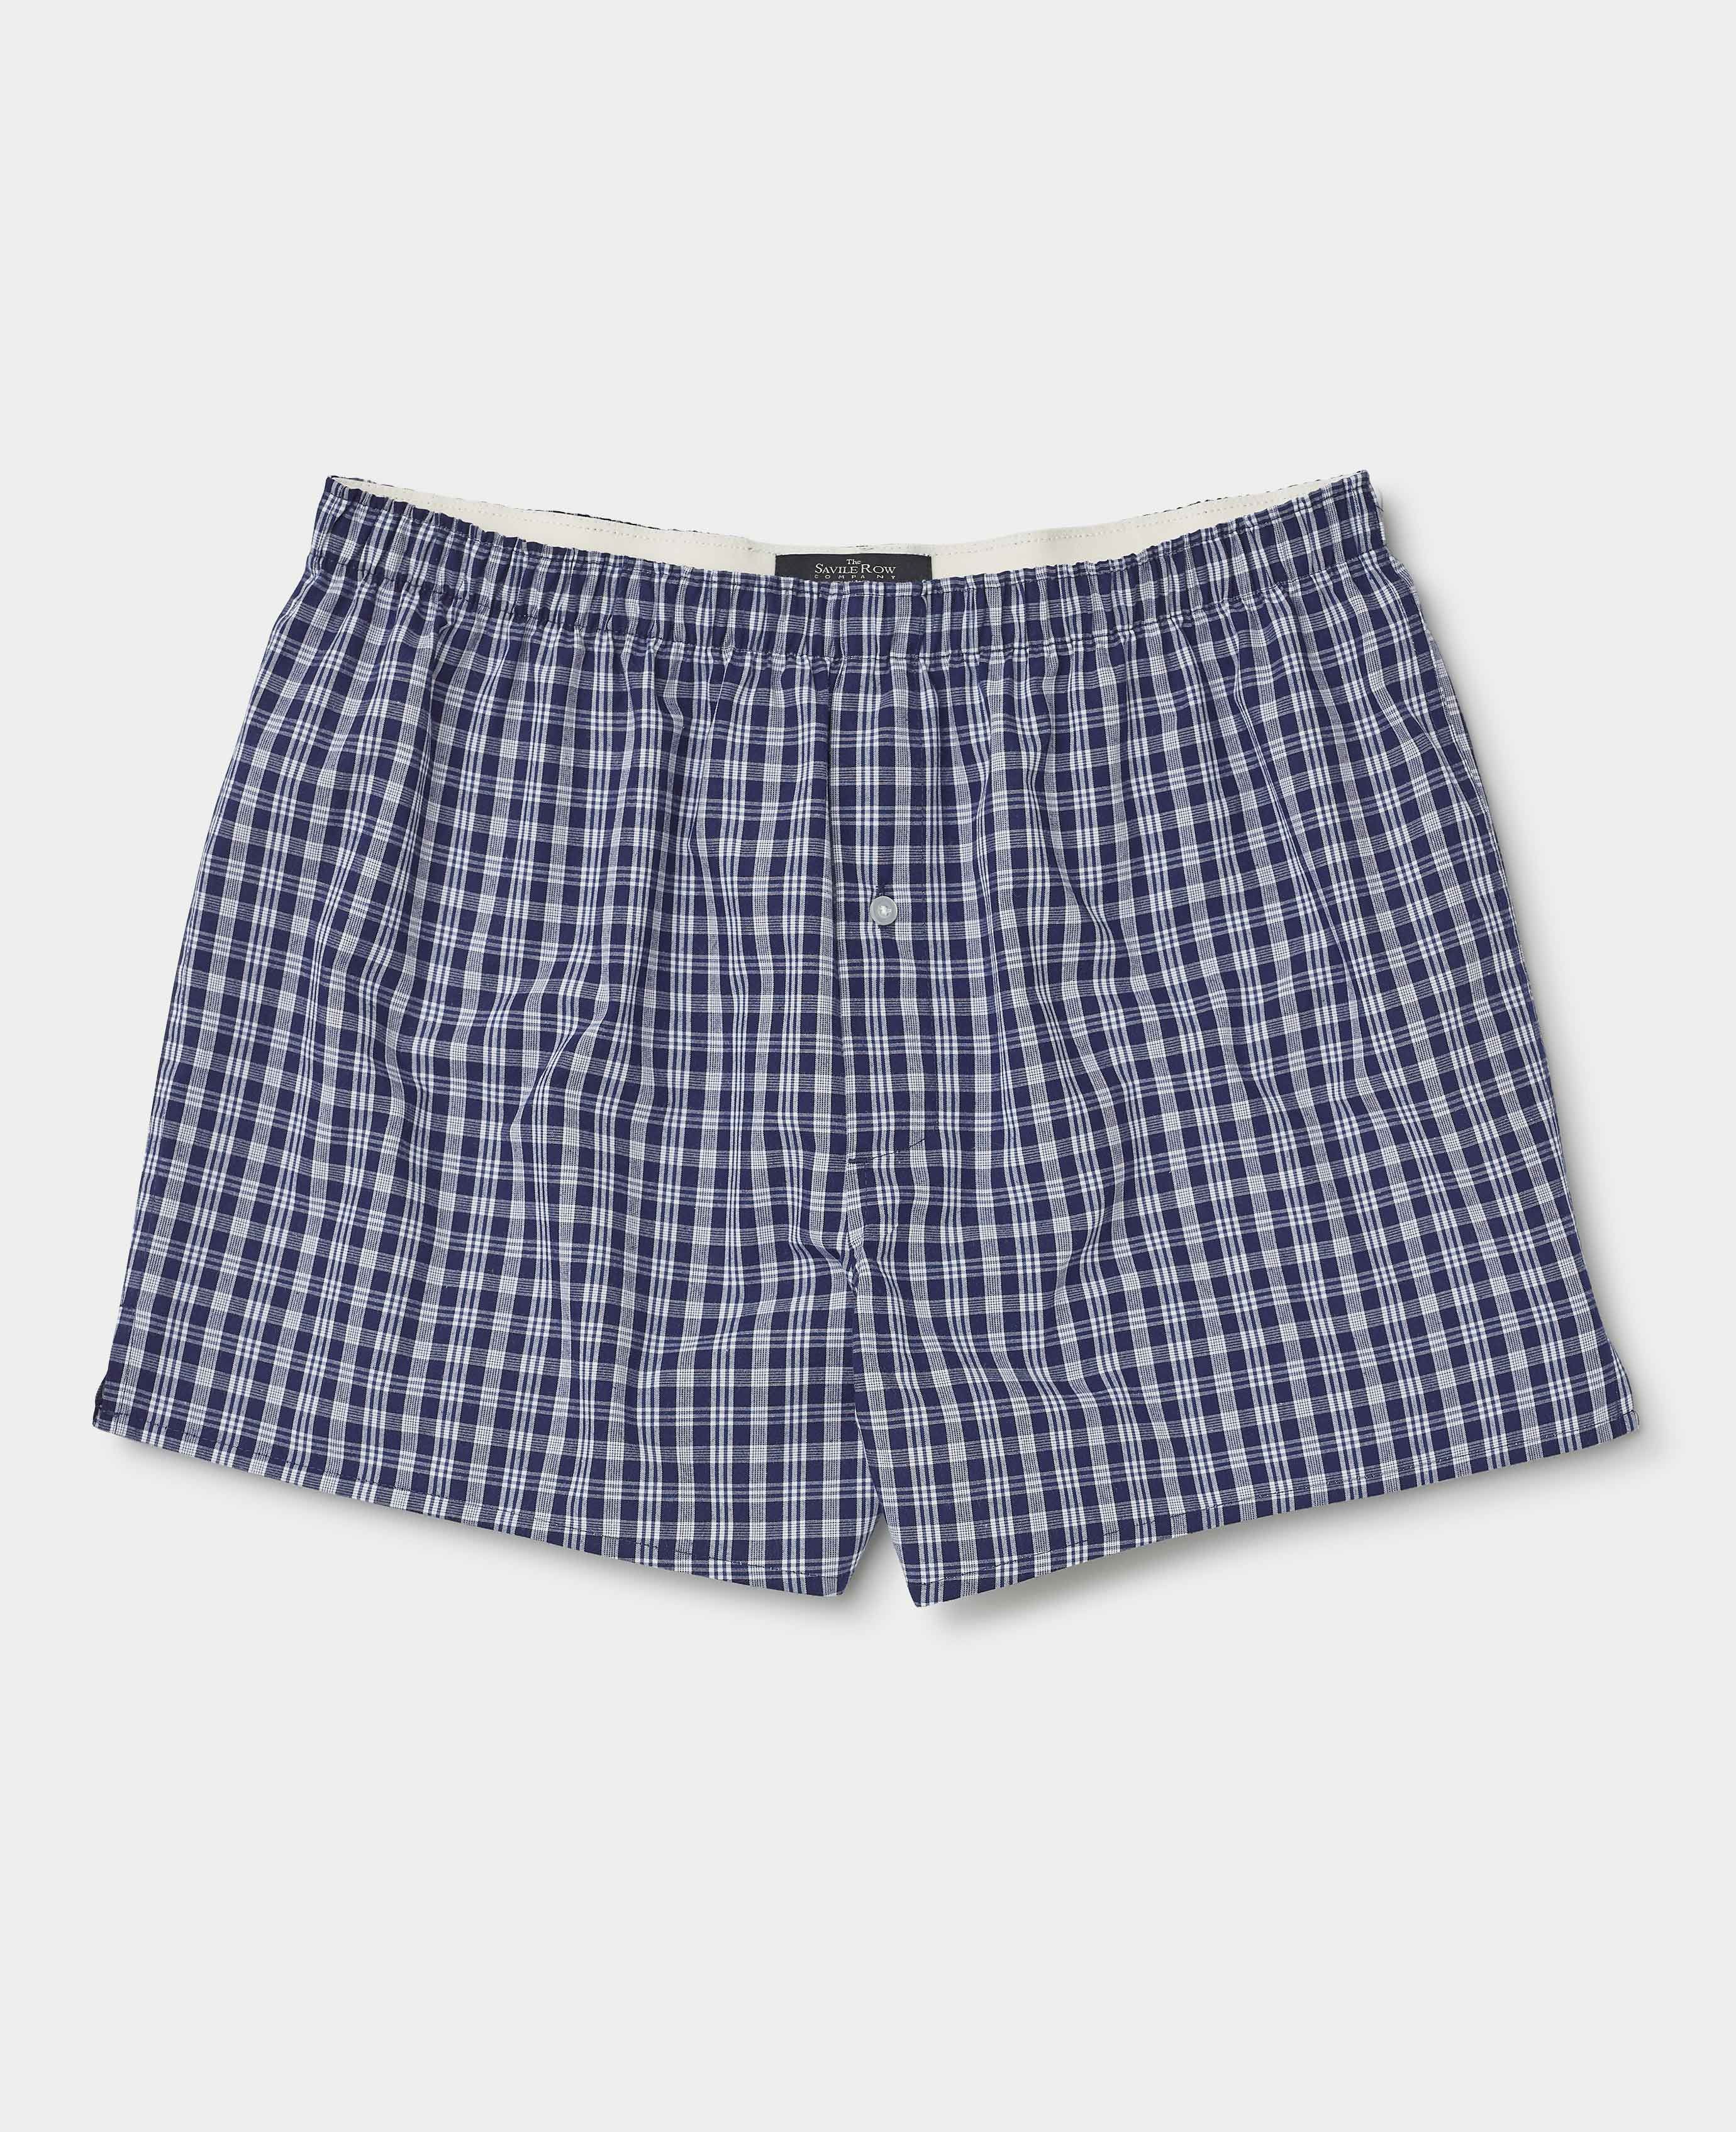 CLASSIC FIT COTTON – LOOSE BOXERS | 3-PACK NAVY